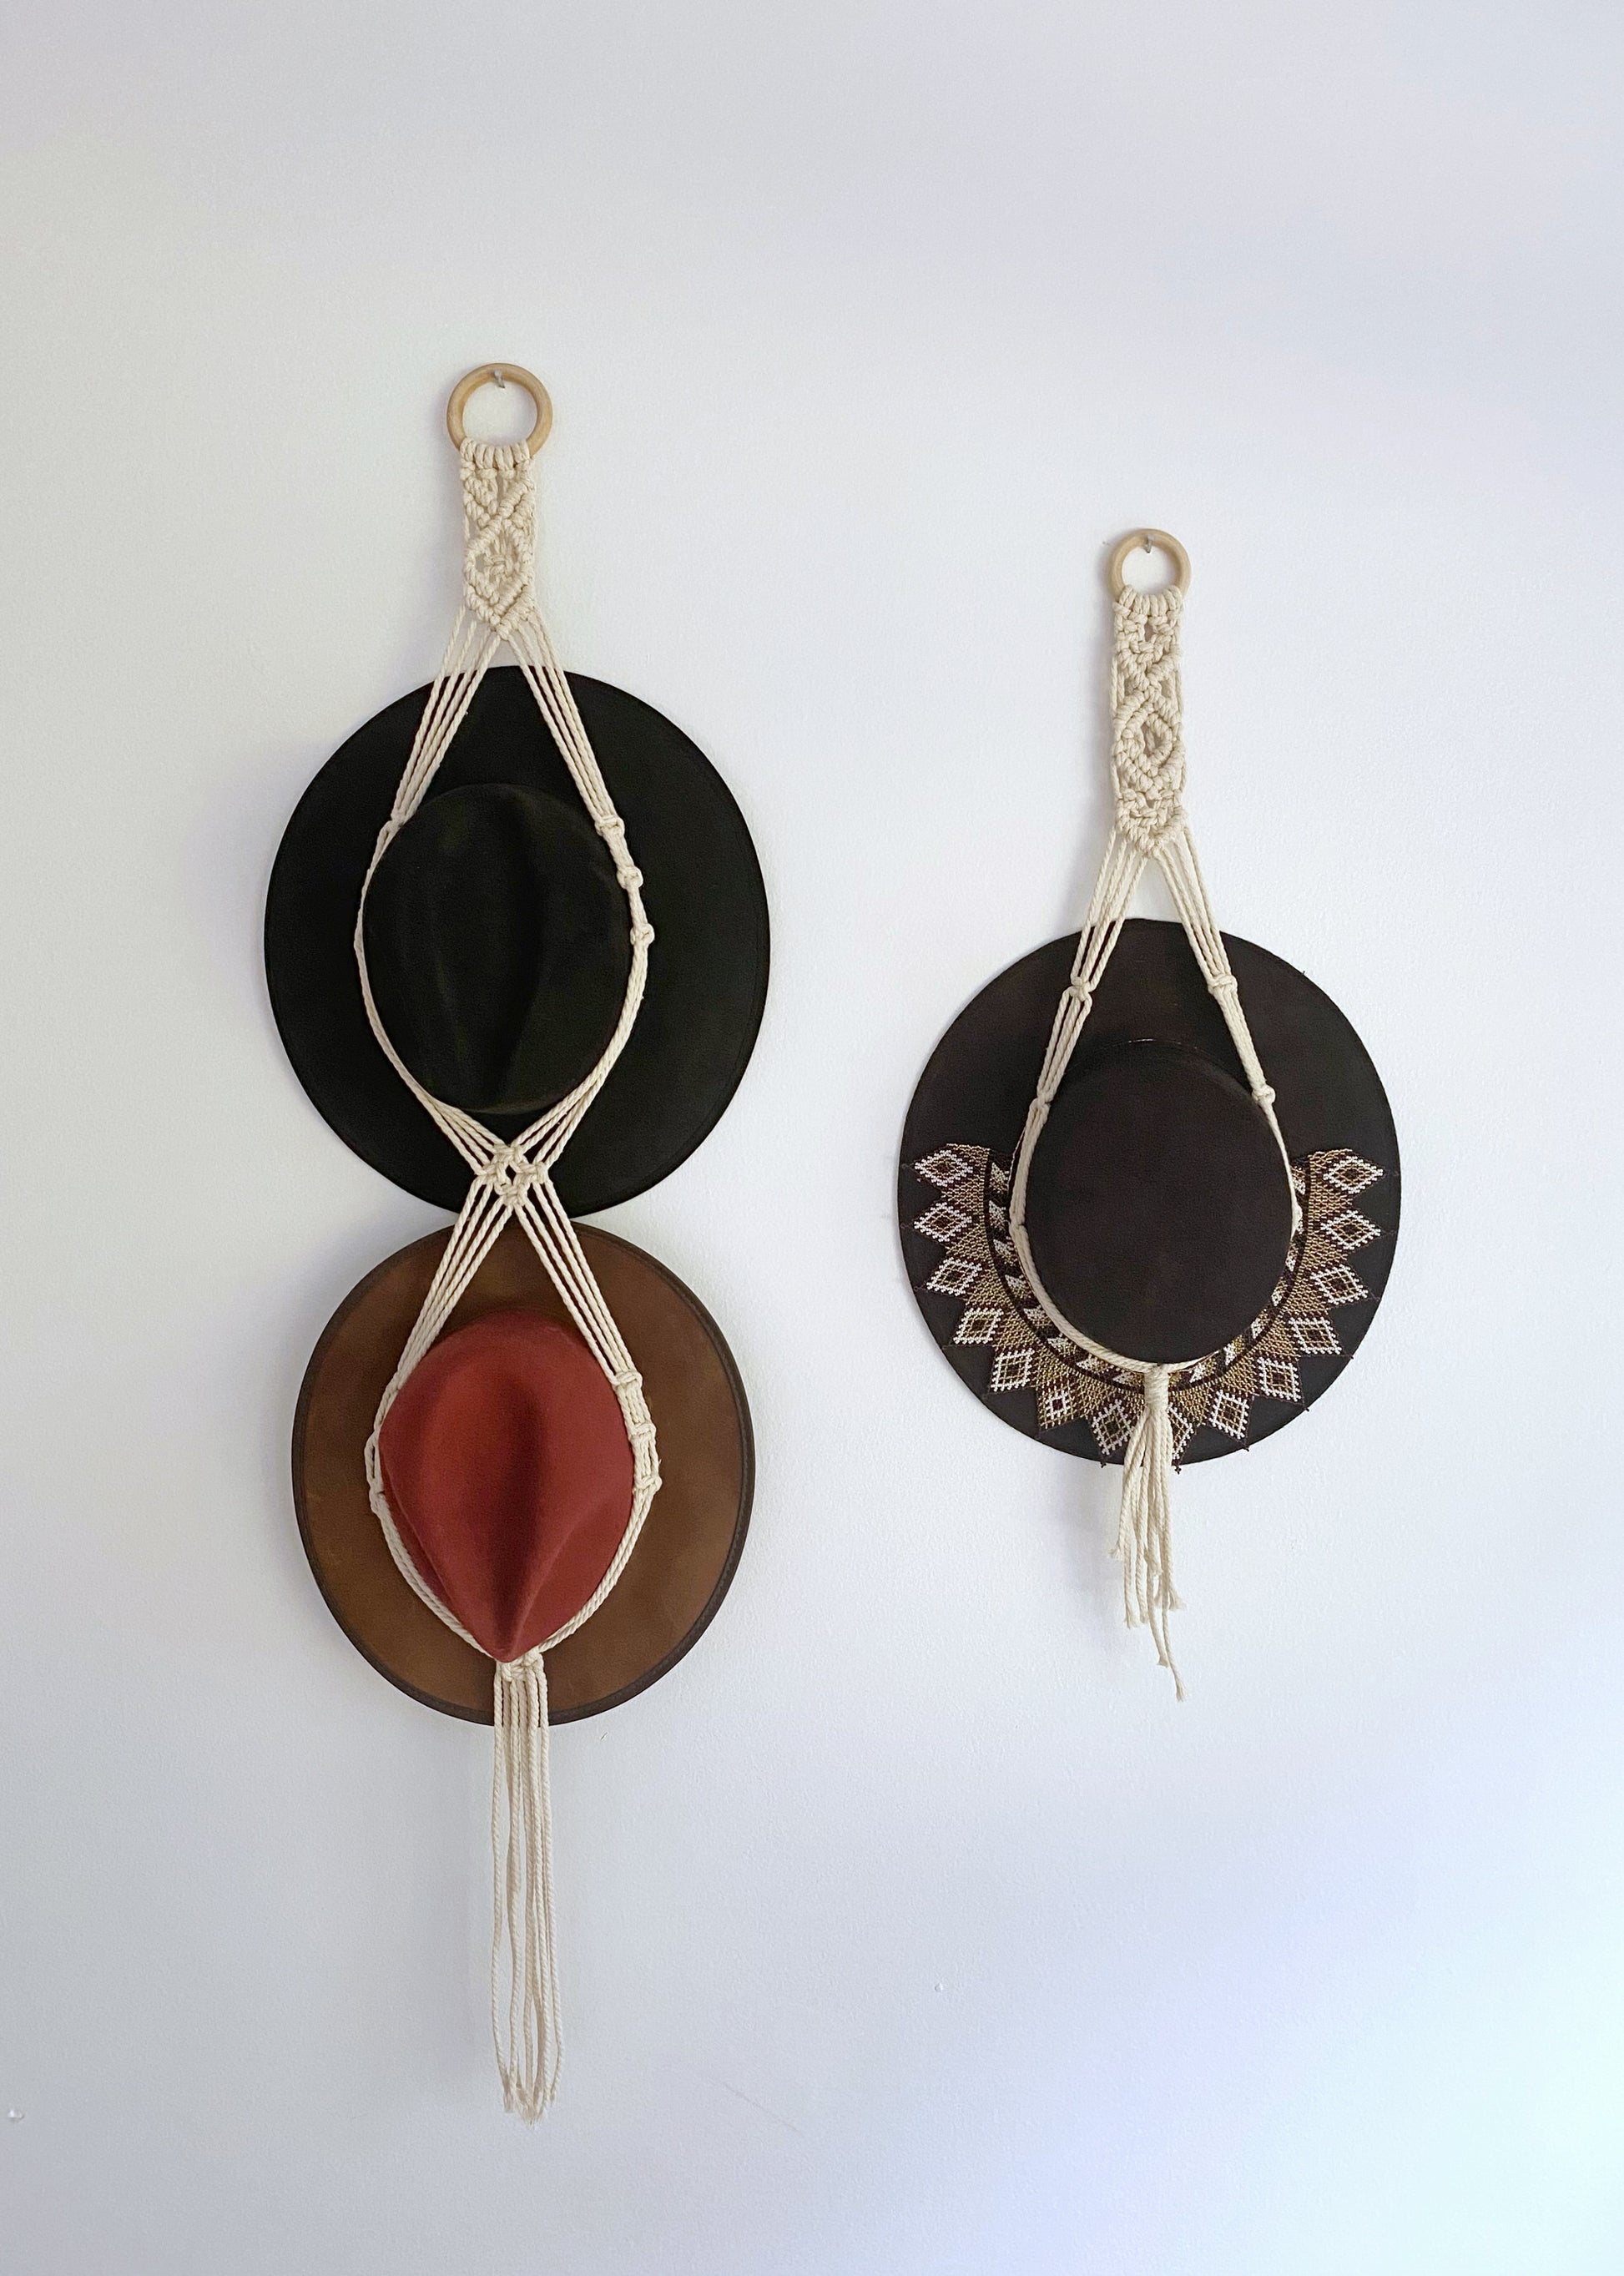 Show off your hat collection and decorate your home with a handmade macrame hat hanger! These hangers are lightweight and easy to hang, and designed to fit a variety of hat sizes. They also make for a unique housewarming gift!